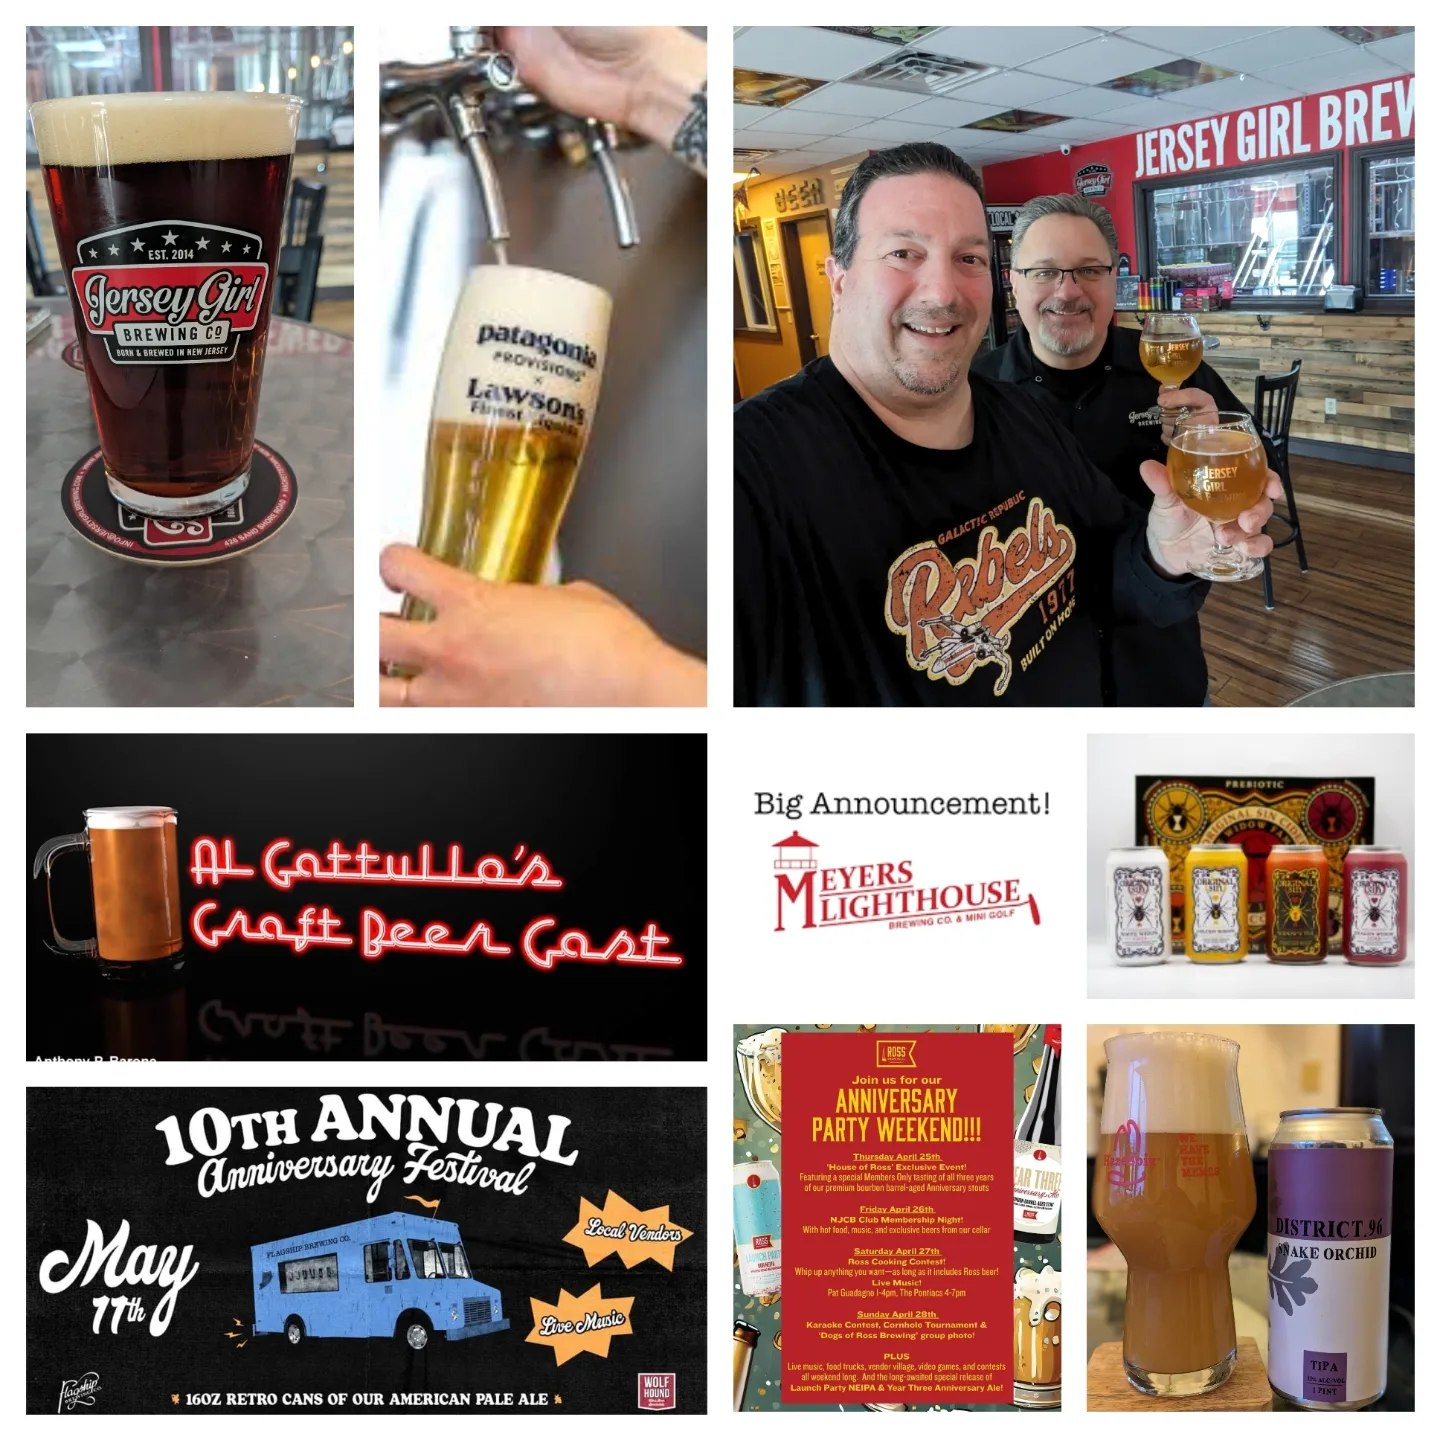 AG Craft Beer Cast 4-14-24 Jersey Girl Brewing